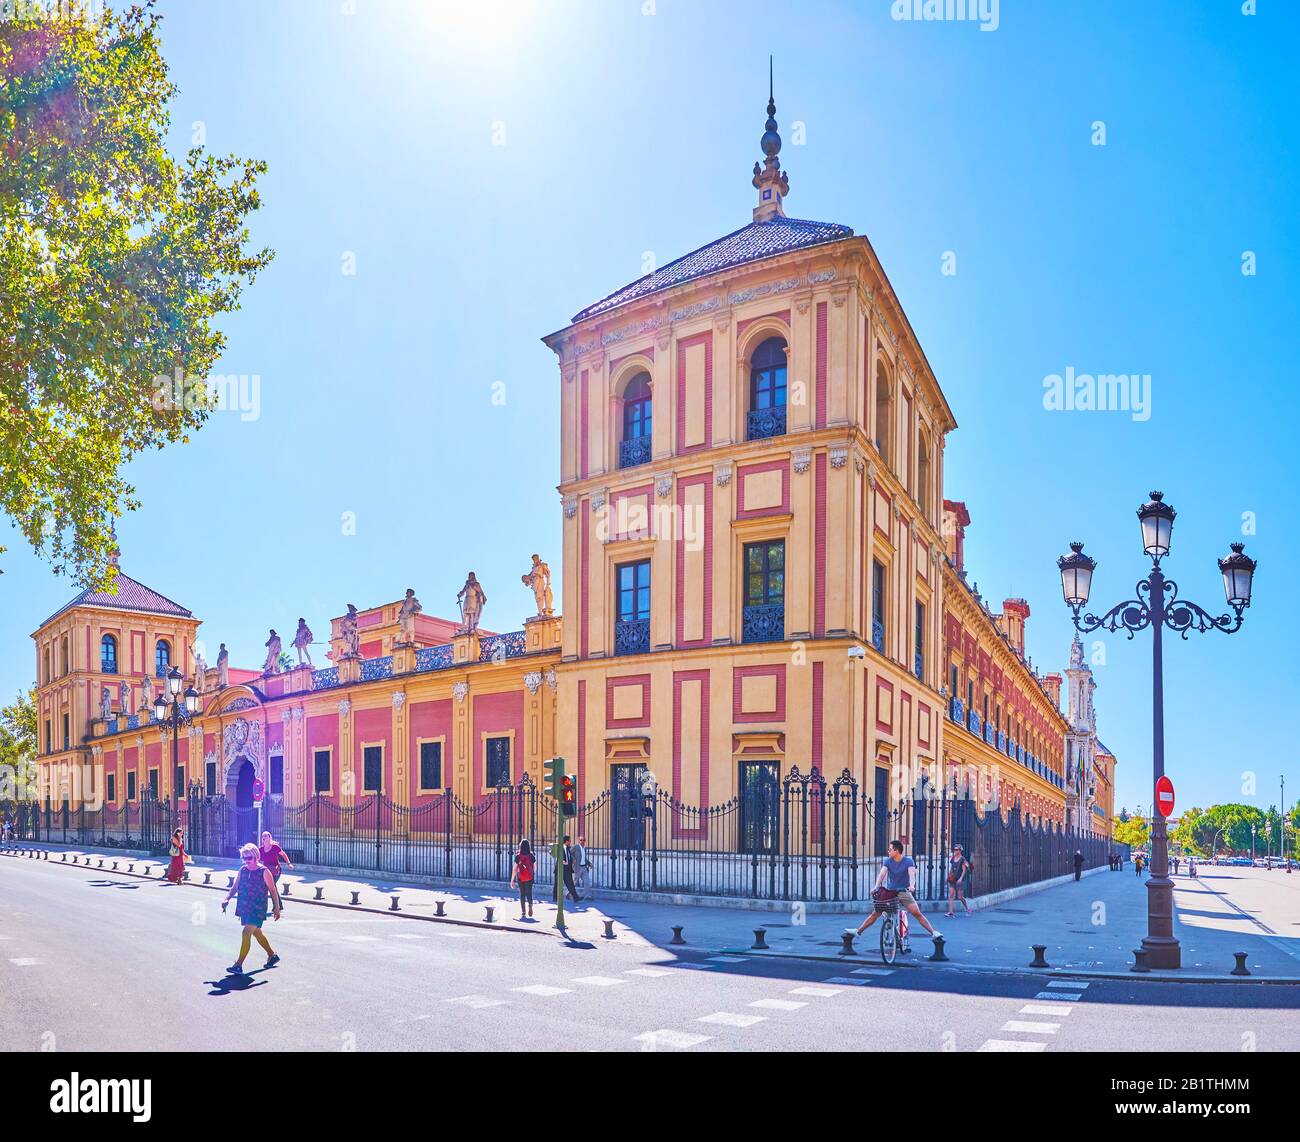 SEVILLE, SPAIN - OCTOBER 1, 2019: Palace of San Telmo with its amazing side facade with sculptures atop the central part, named the Gallery of illustr Stock Photo